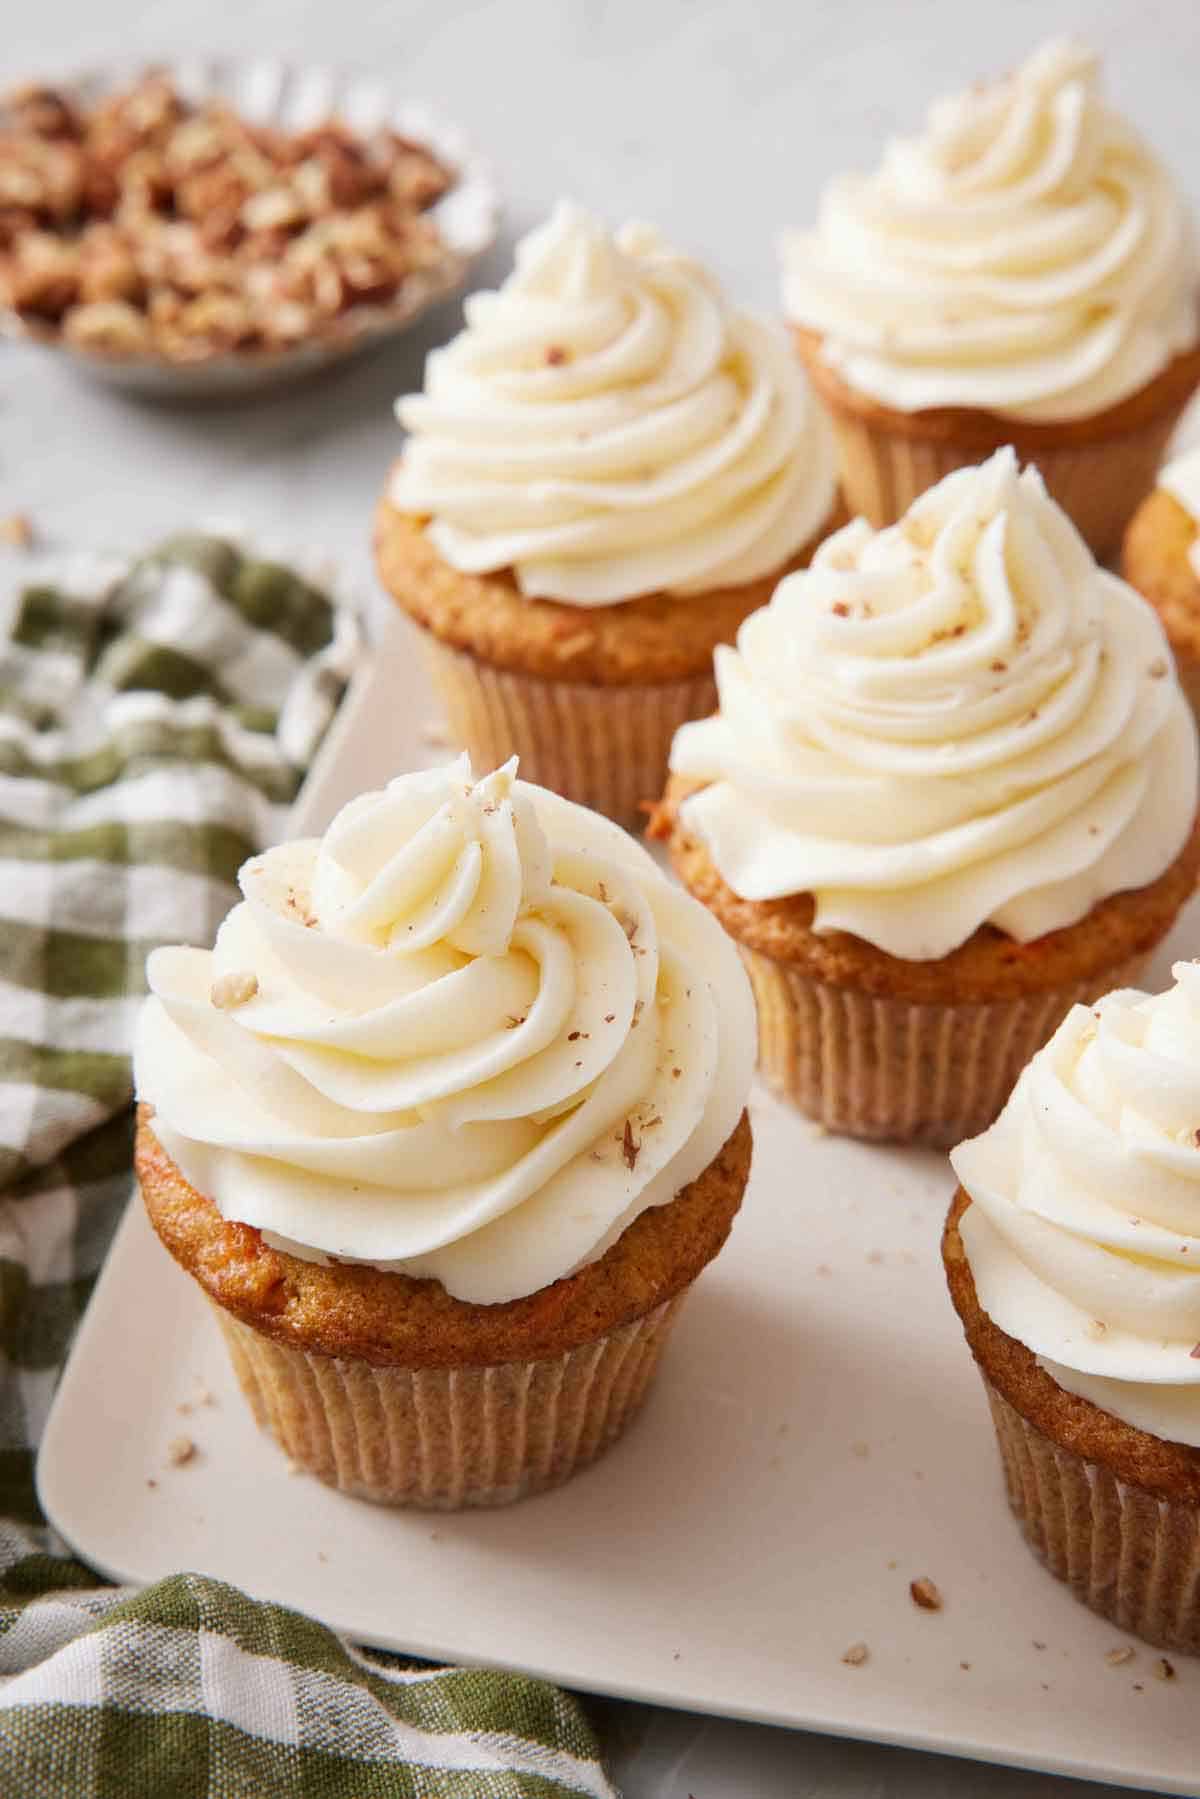 Multiple carrot cake cupcakes on a square platter with a checkered napkin beside them and a bowl of walnuts in the background.